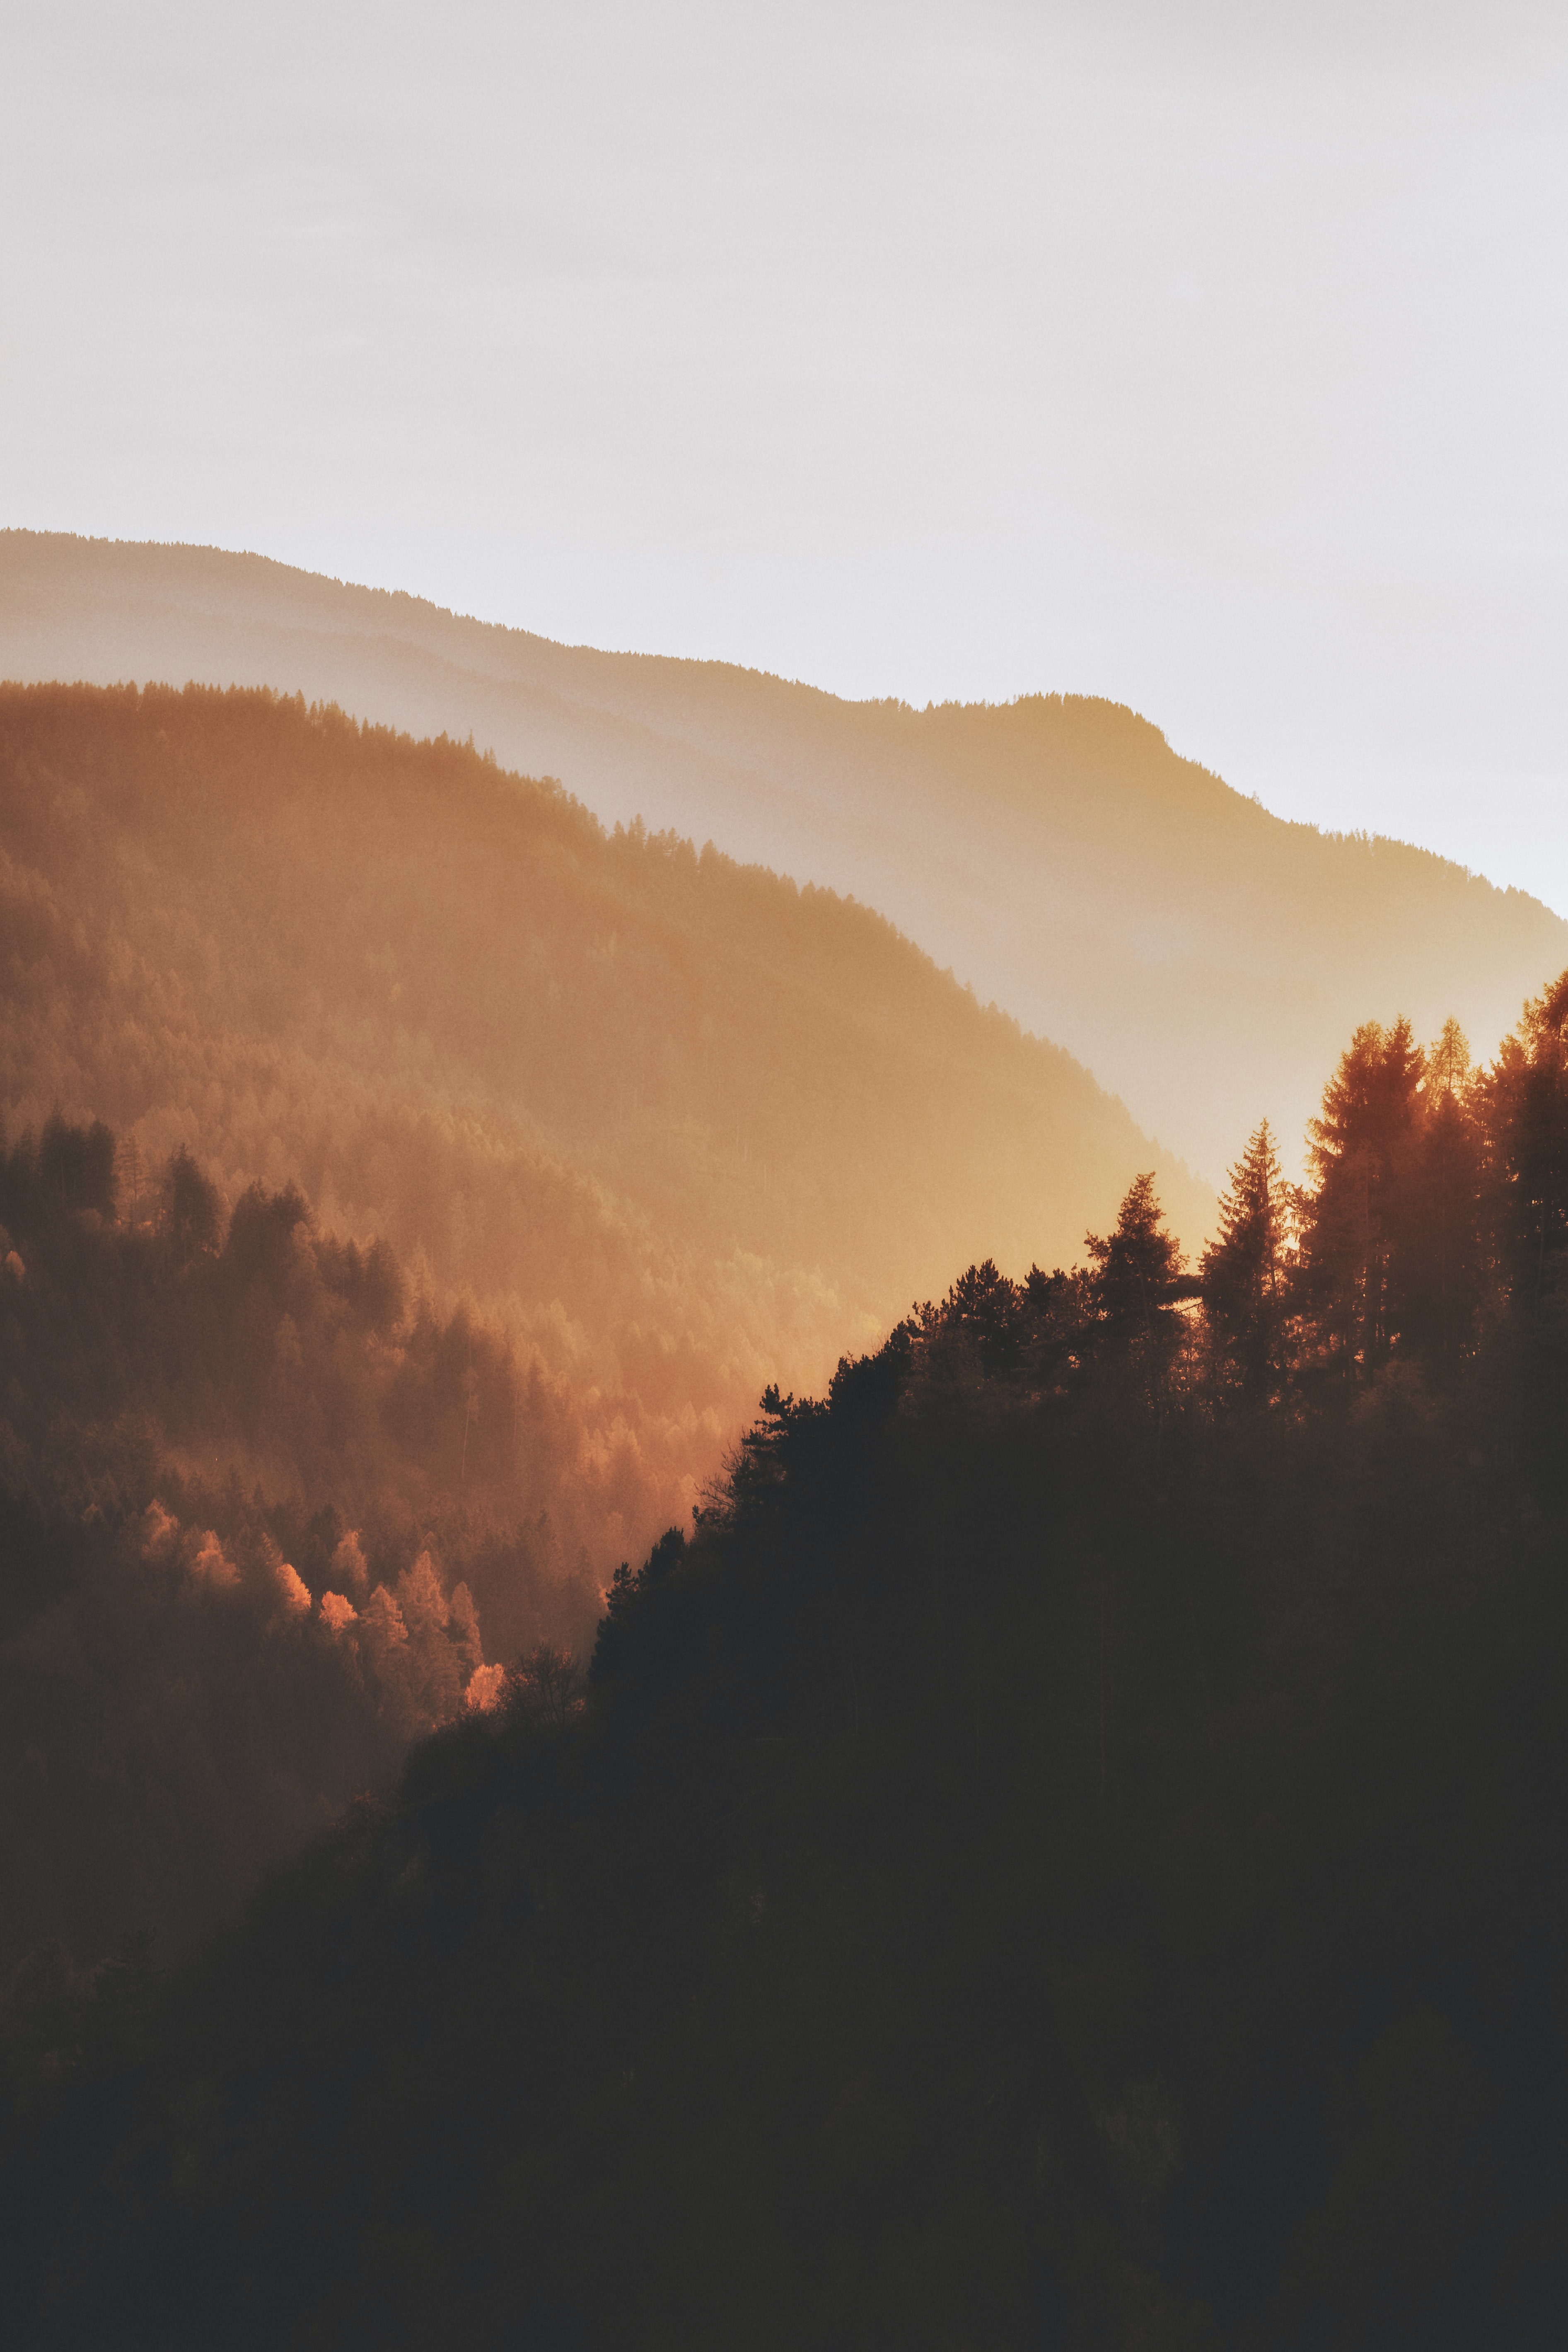 sunset, hills, nature, trees, forest lock screen backgrounds